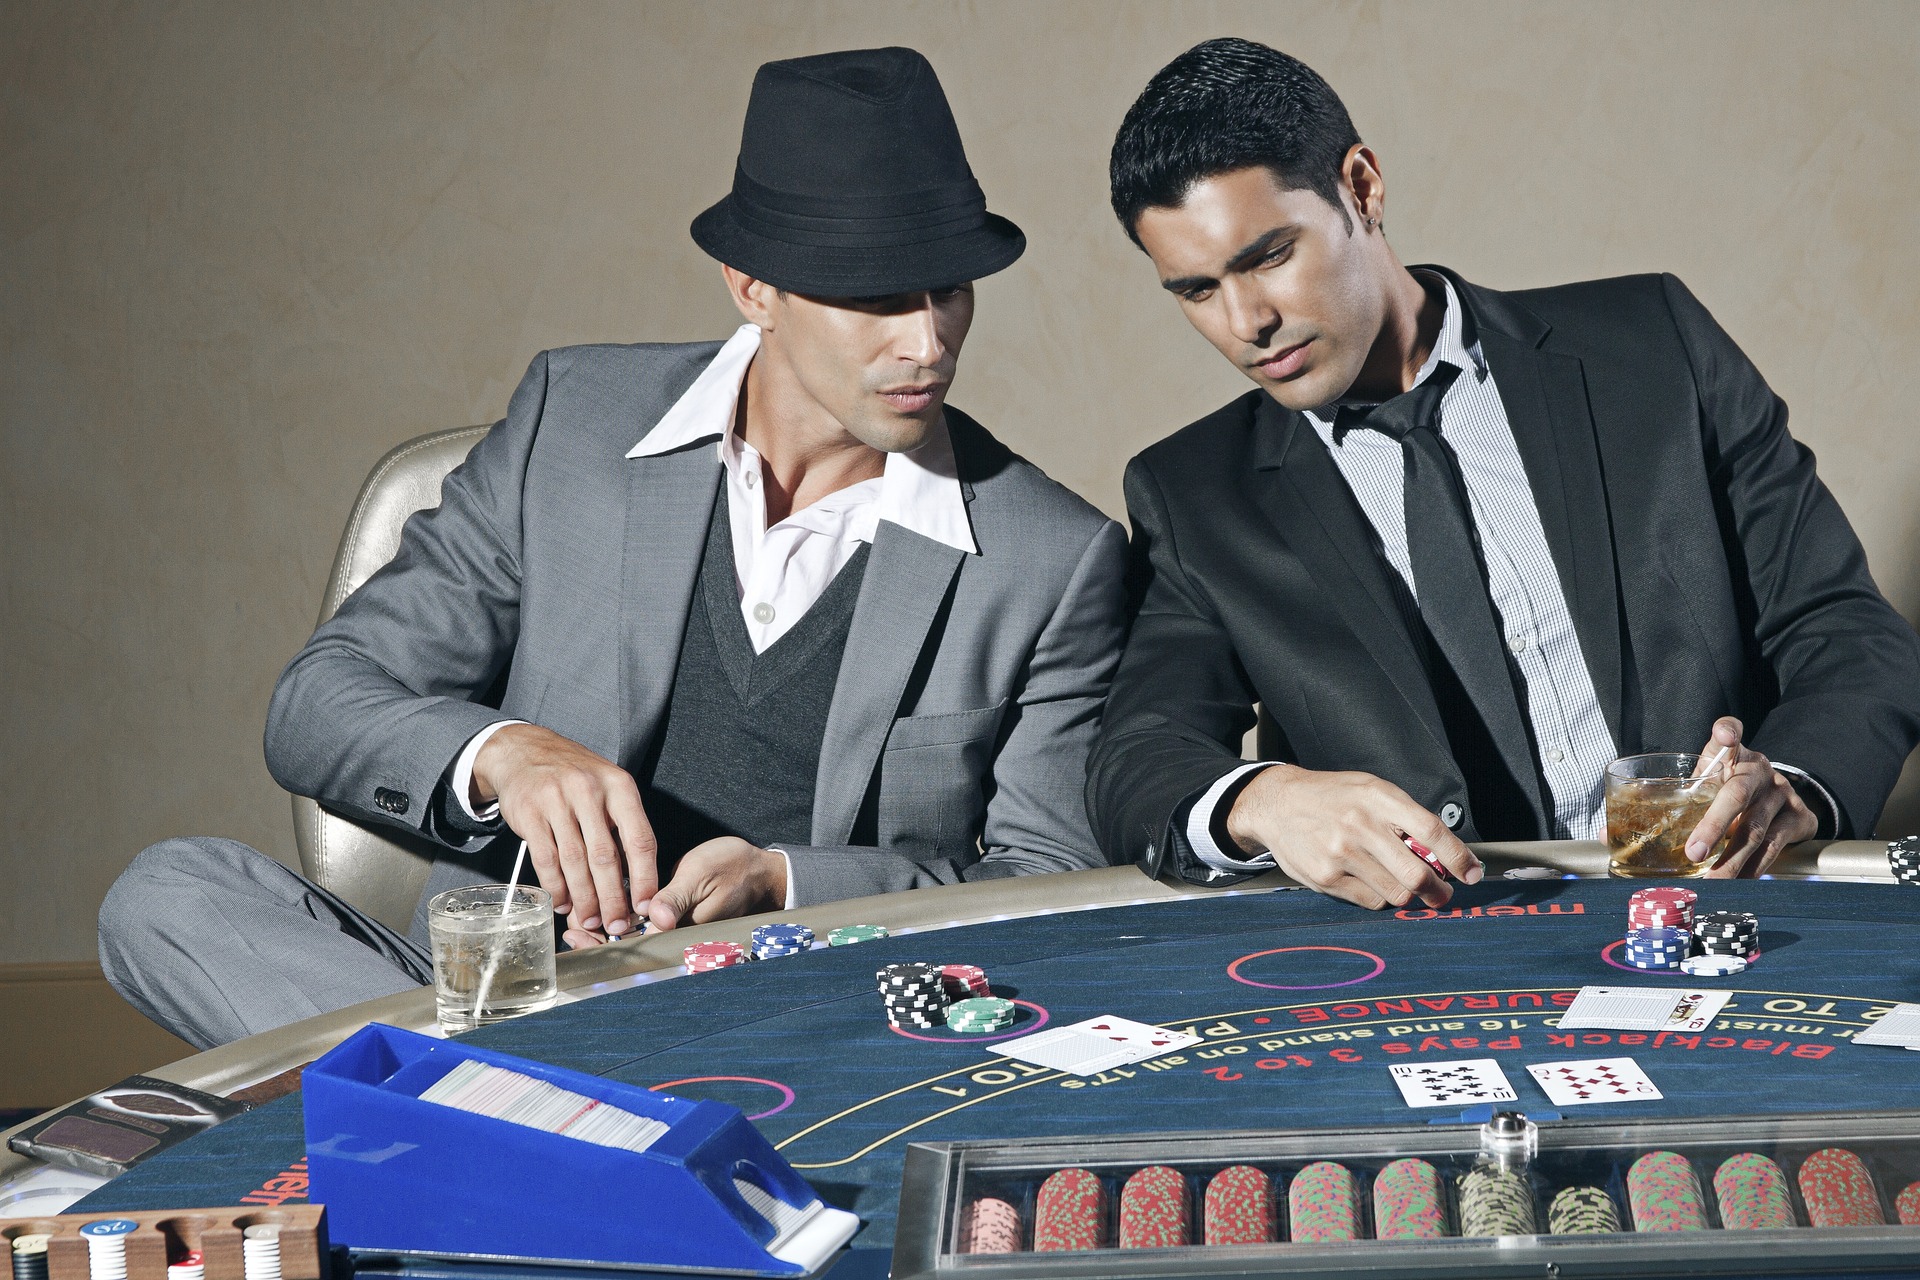 The Psychology And Science Behind Gambling Behavior - What Makes People Gamble?